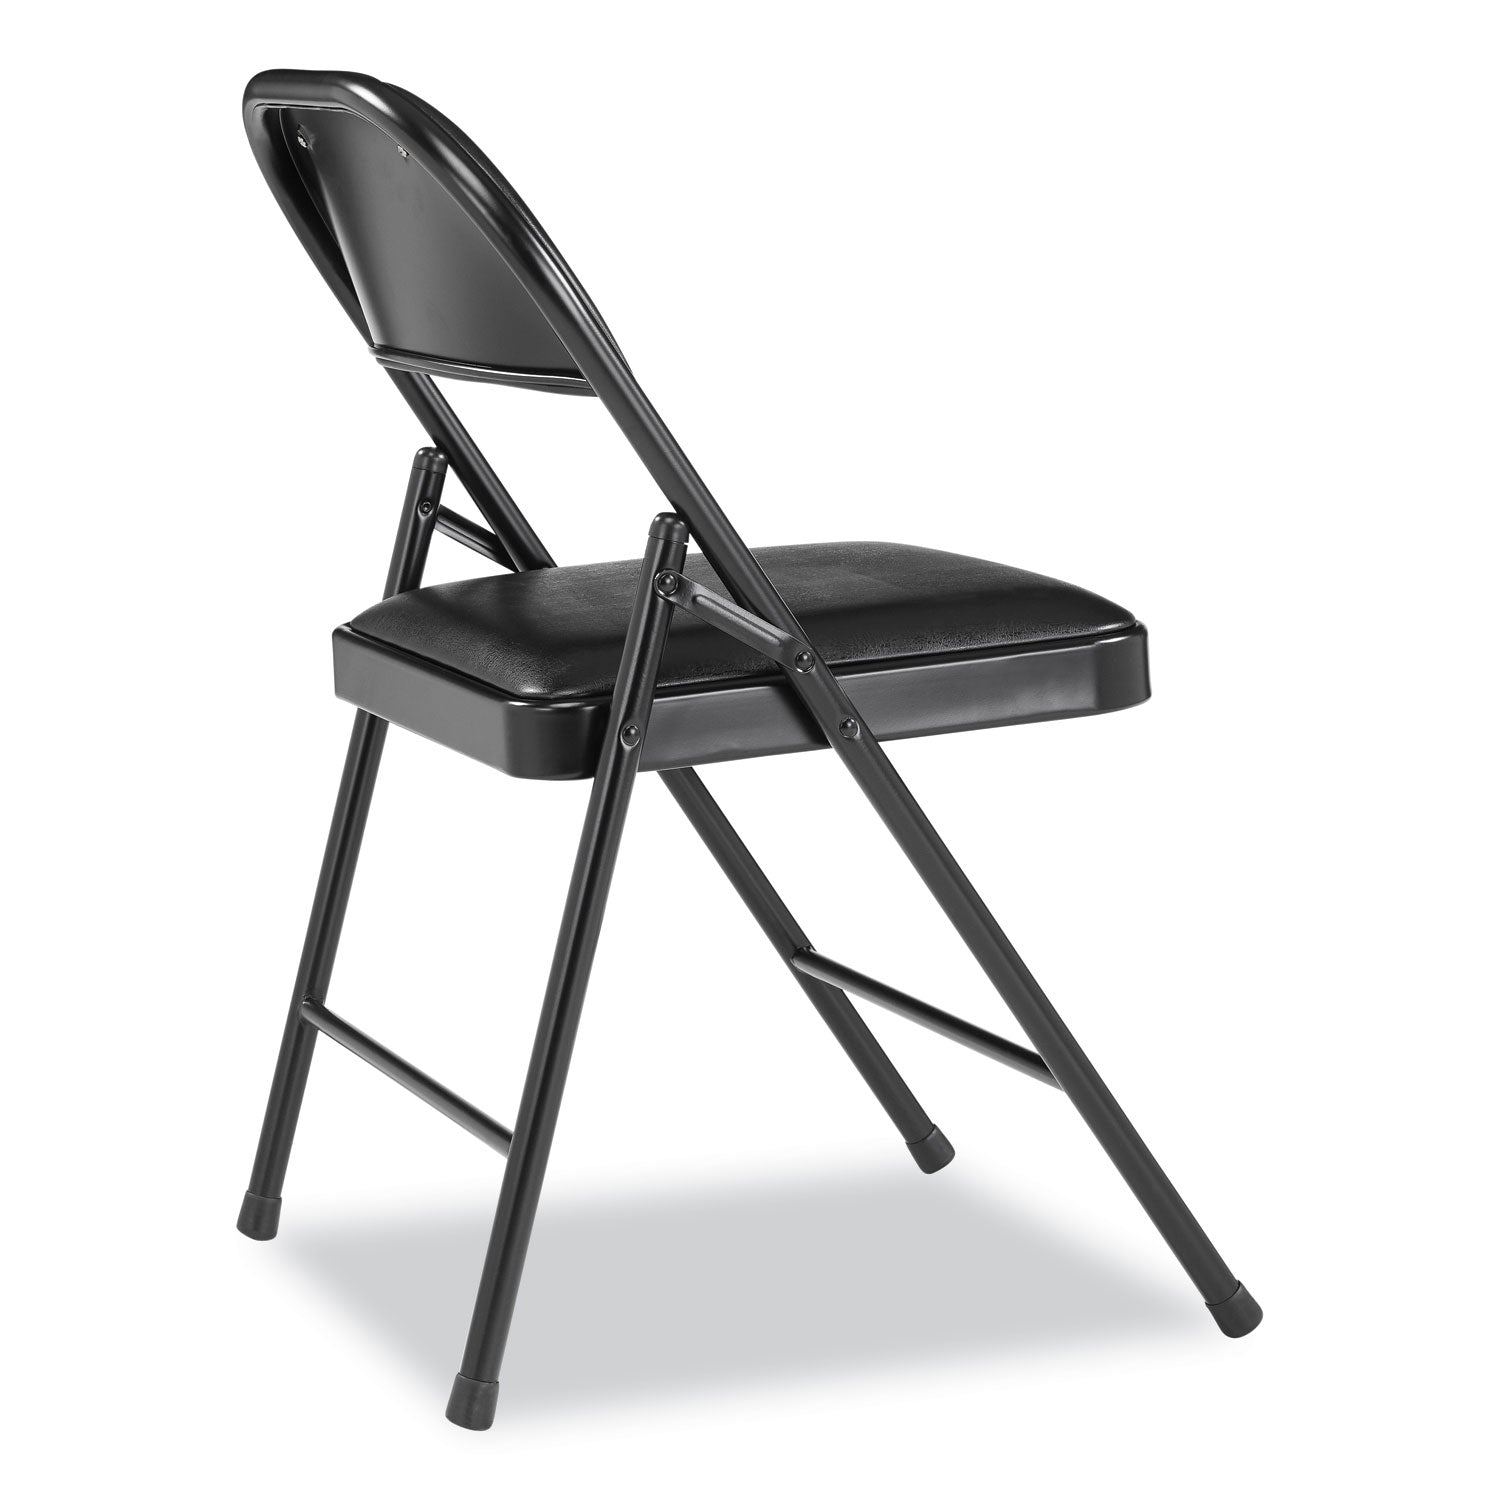 950-series-vinyl-padded-steel-folding-chair-supports-up-to-250-lb-1775-seat-height-black-4-cartonships-in-1-3-bus-days_nps950 - 4